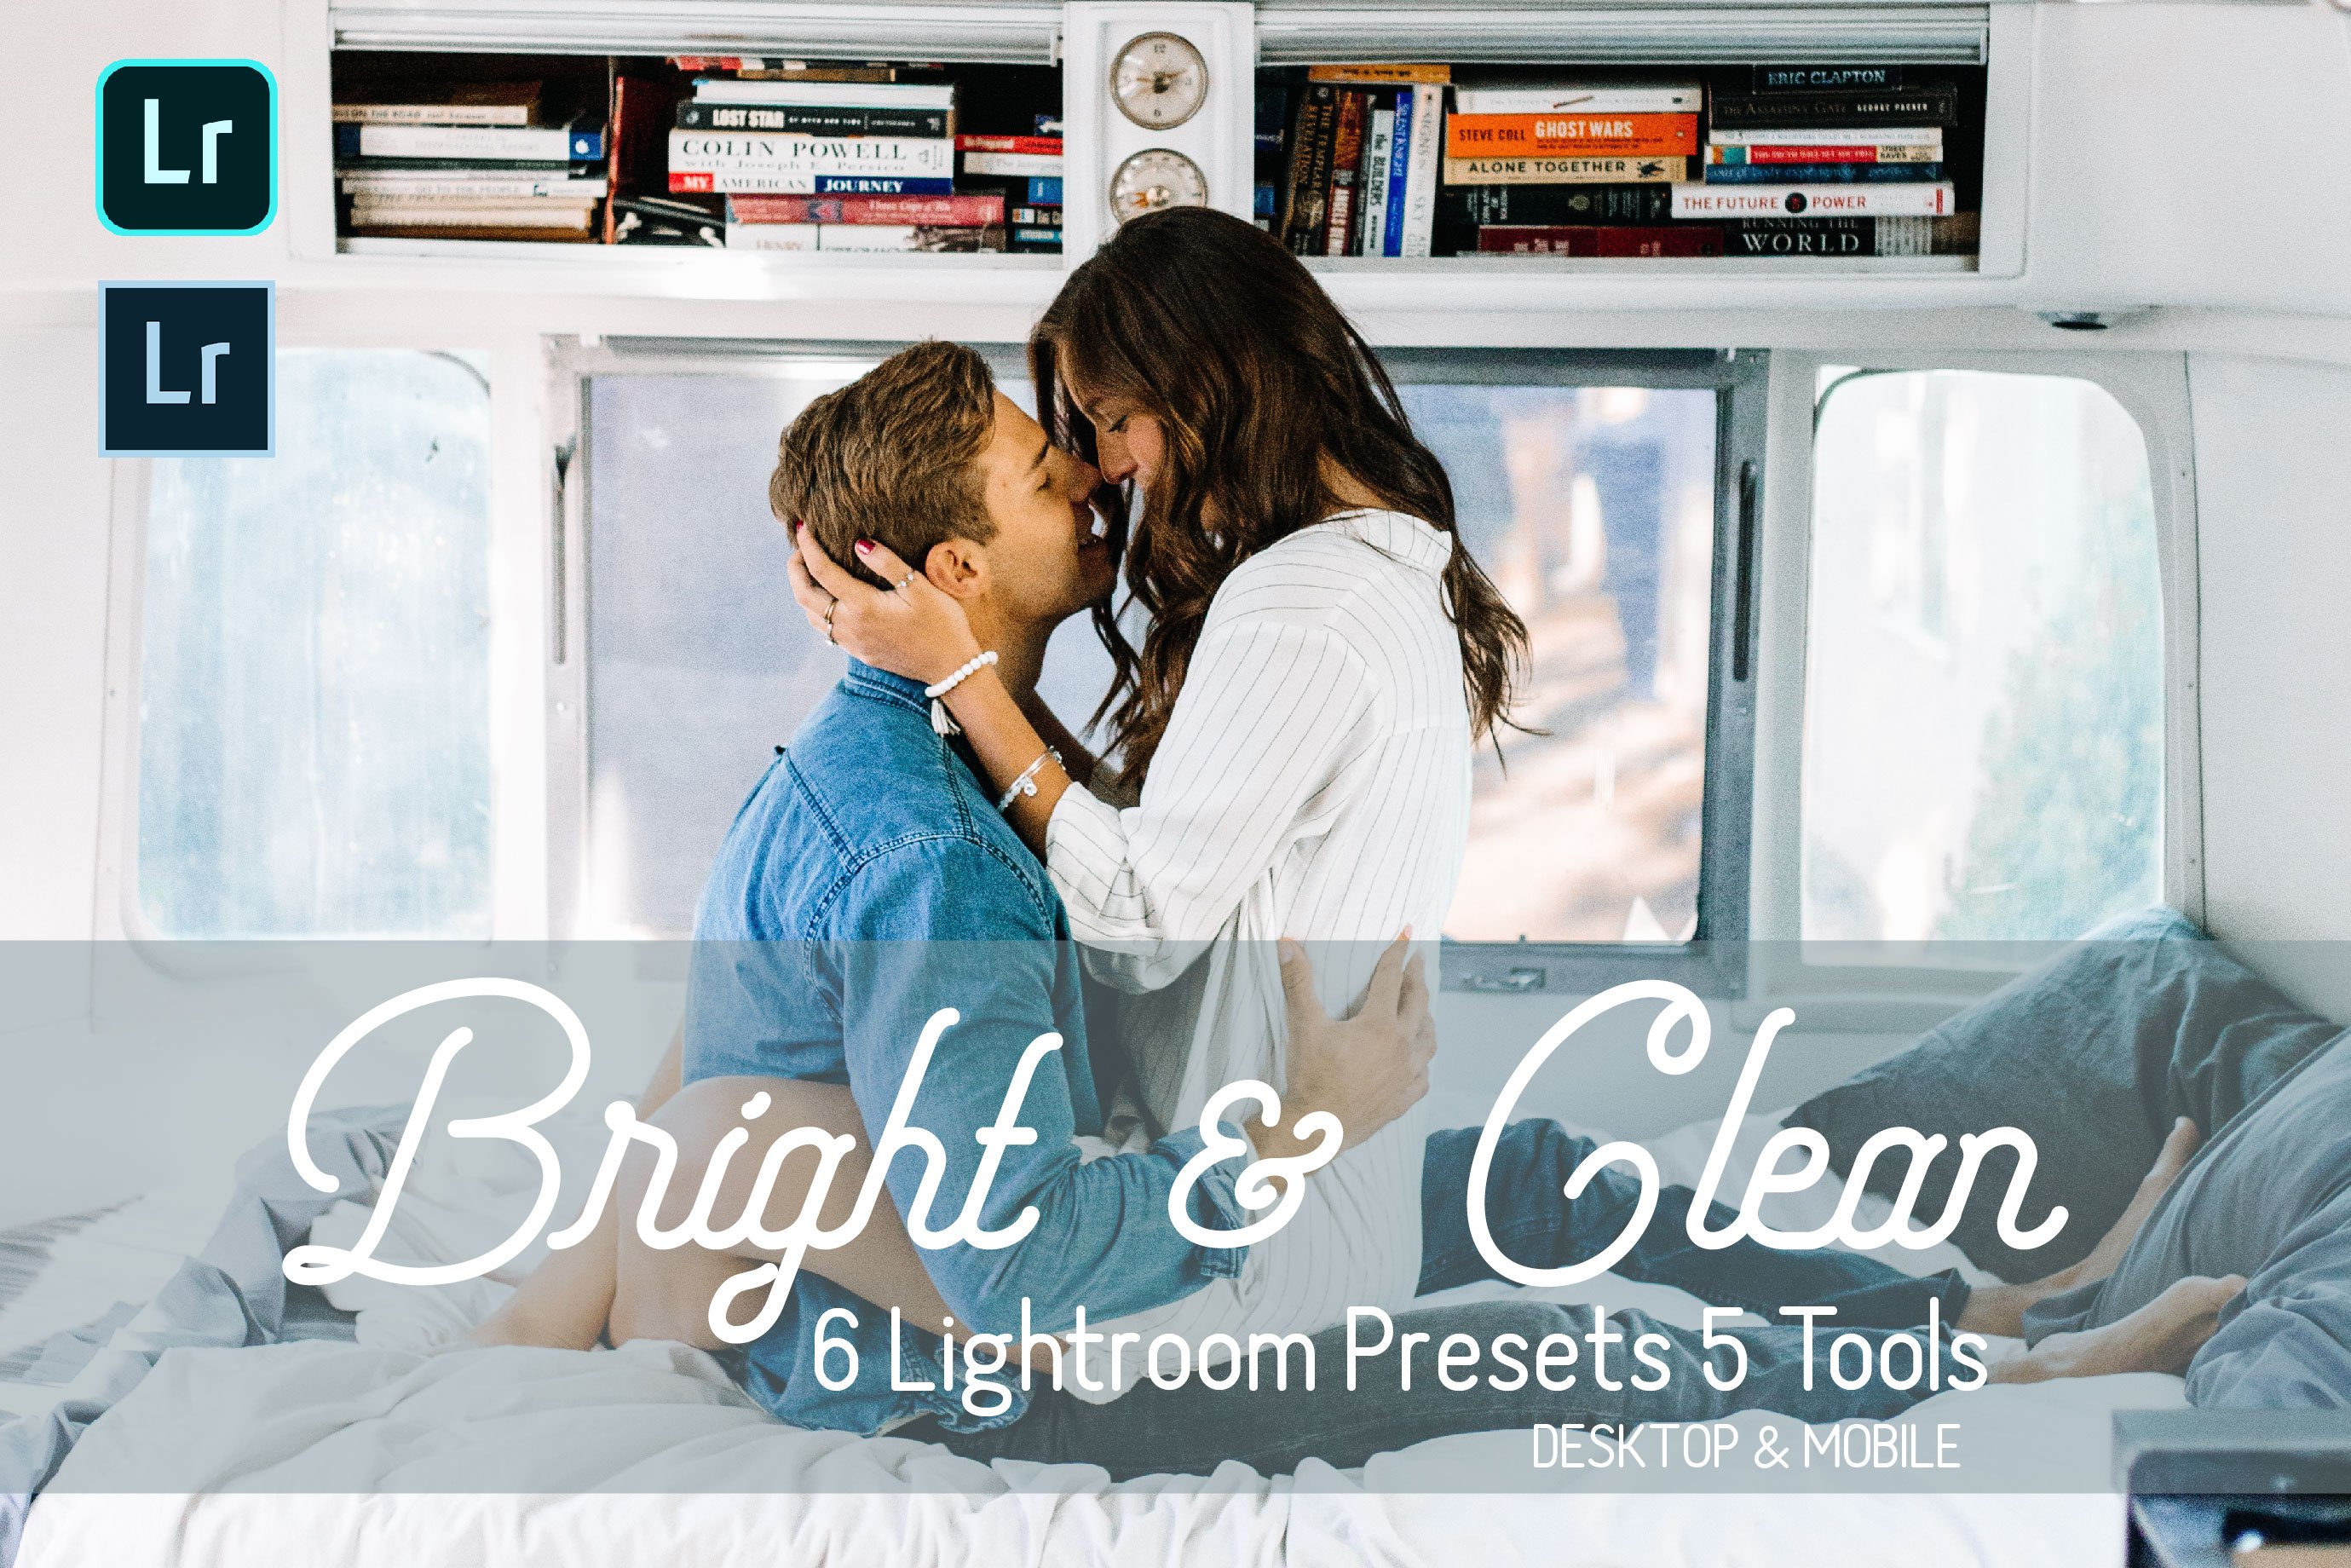 Bright & Clean Lightroom Presetscover image.